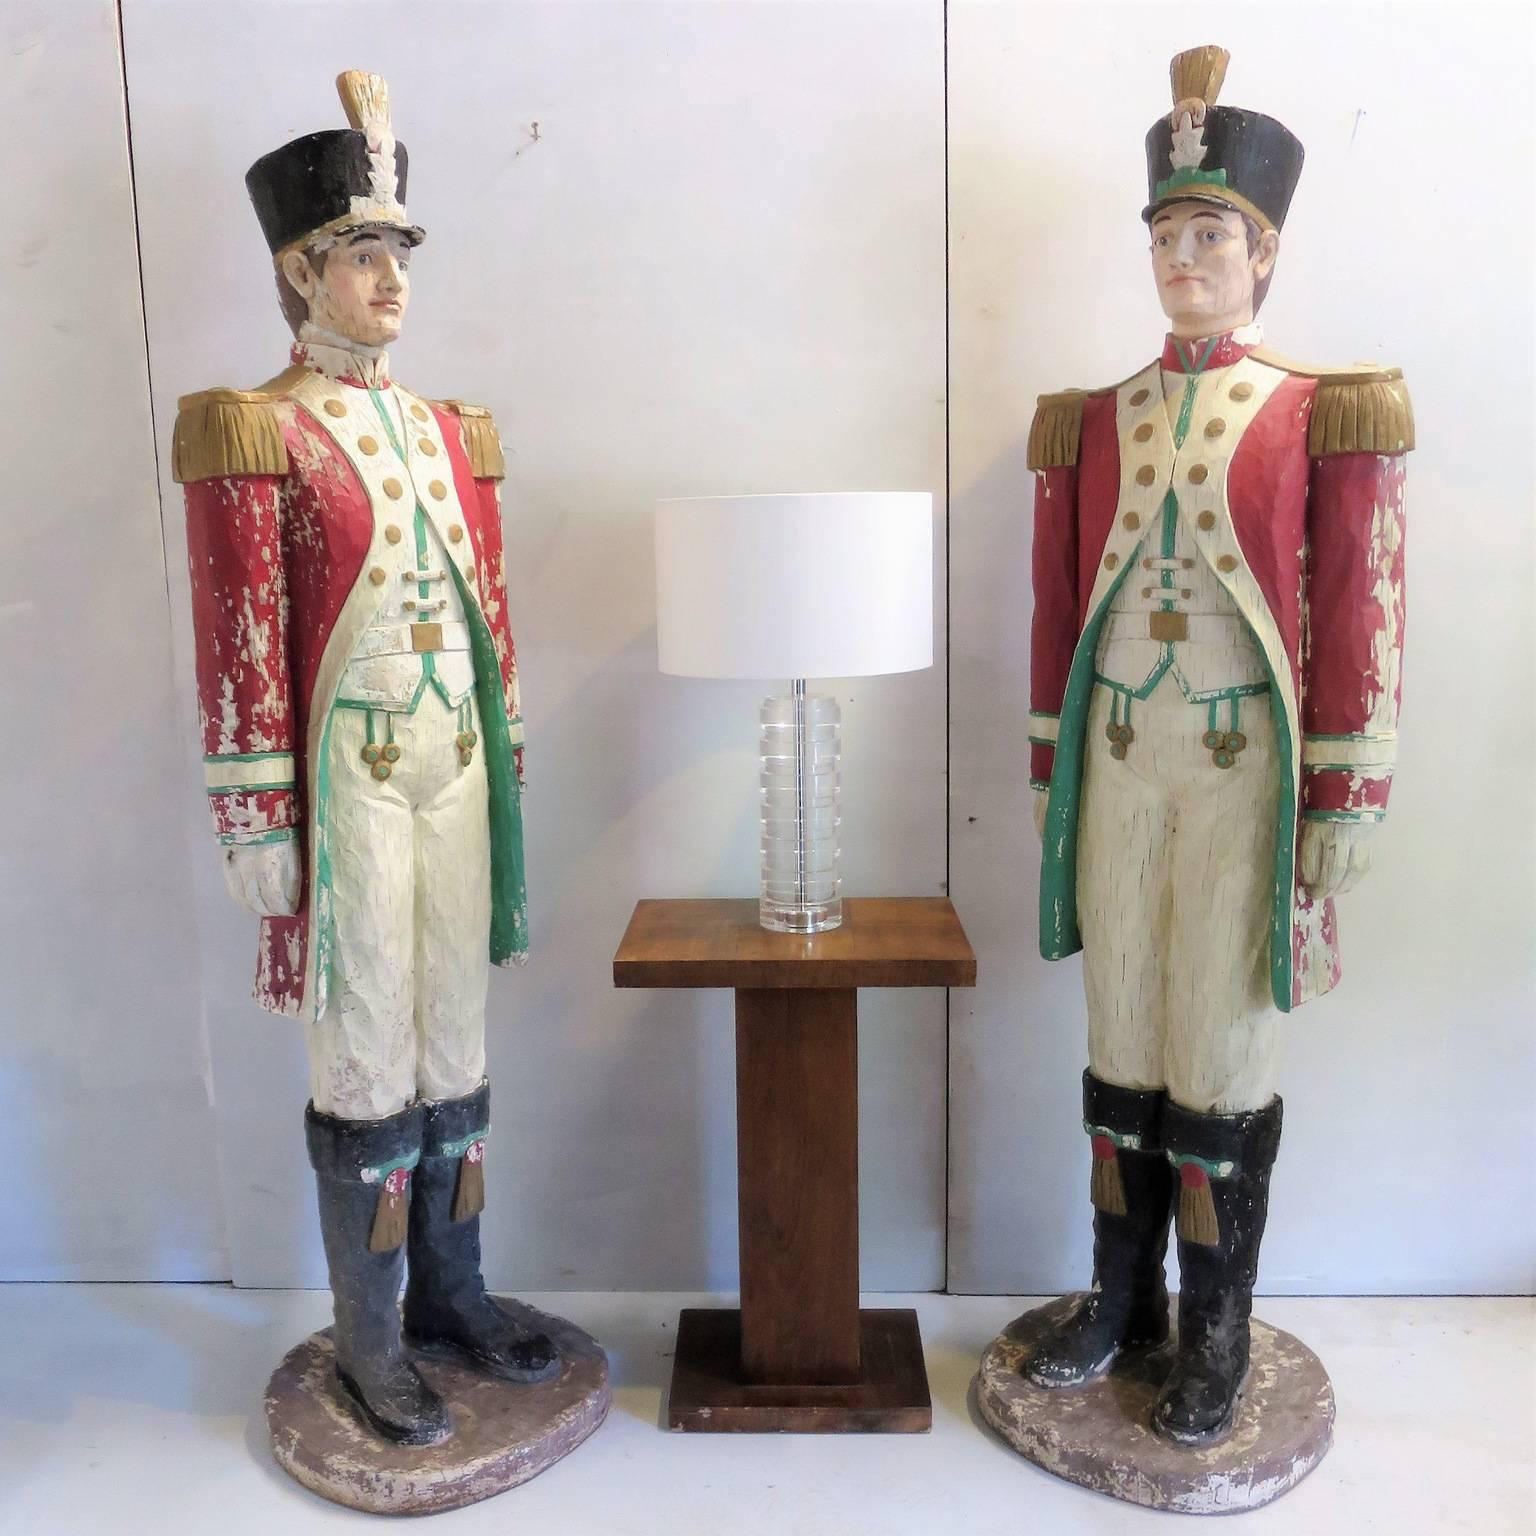 Pair of Handsome Lifesize Military Guards in Uniform Midcentury Sculptures 3